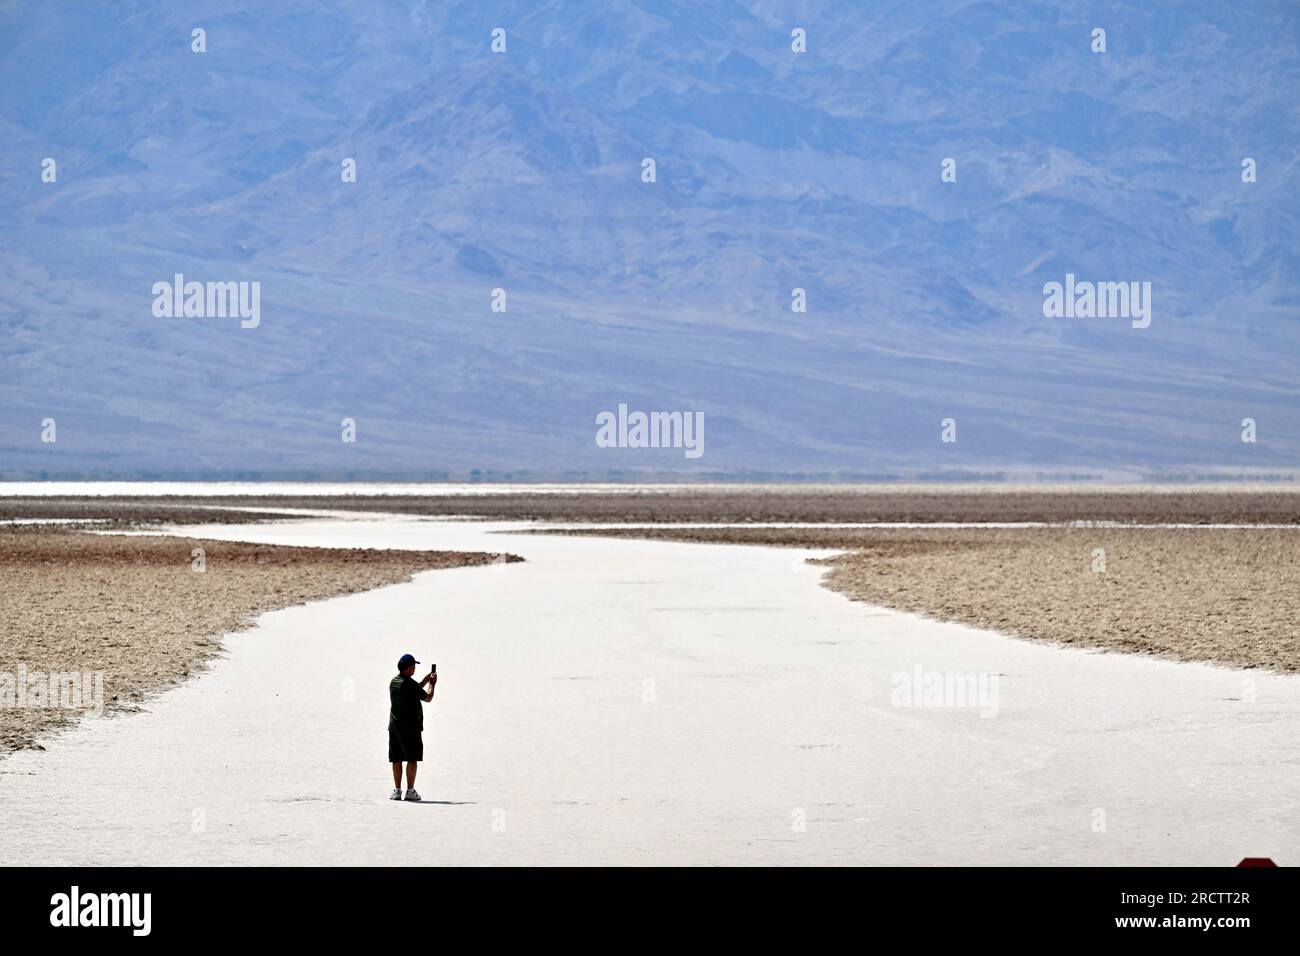 https://c8.alamy.com/comp/2RCTT2R/july-16-2023-death-valley-national-park-california-us-a-man-walks-on-the-salt-flats-at-badwater-basin-in-death-valley-national-park-california-on-july-16-2023-an-excessive-heat-warning-was-issued-for-much-of-the-southwest-united-states-climate-models-almost-unanimously-predict-that-heat-waves-will-become-more-intense-and-frequent-as-the-planet-continues-to-warm-credit-image-david-beckerzuma-press-wire-editorial-usage-only!-not-for-commercial-usage!-2RCTT2R.jpg